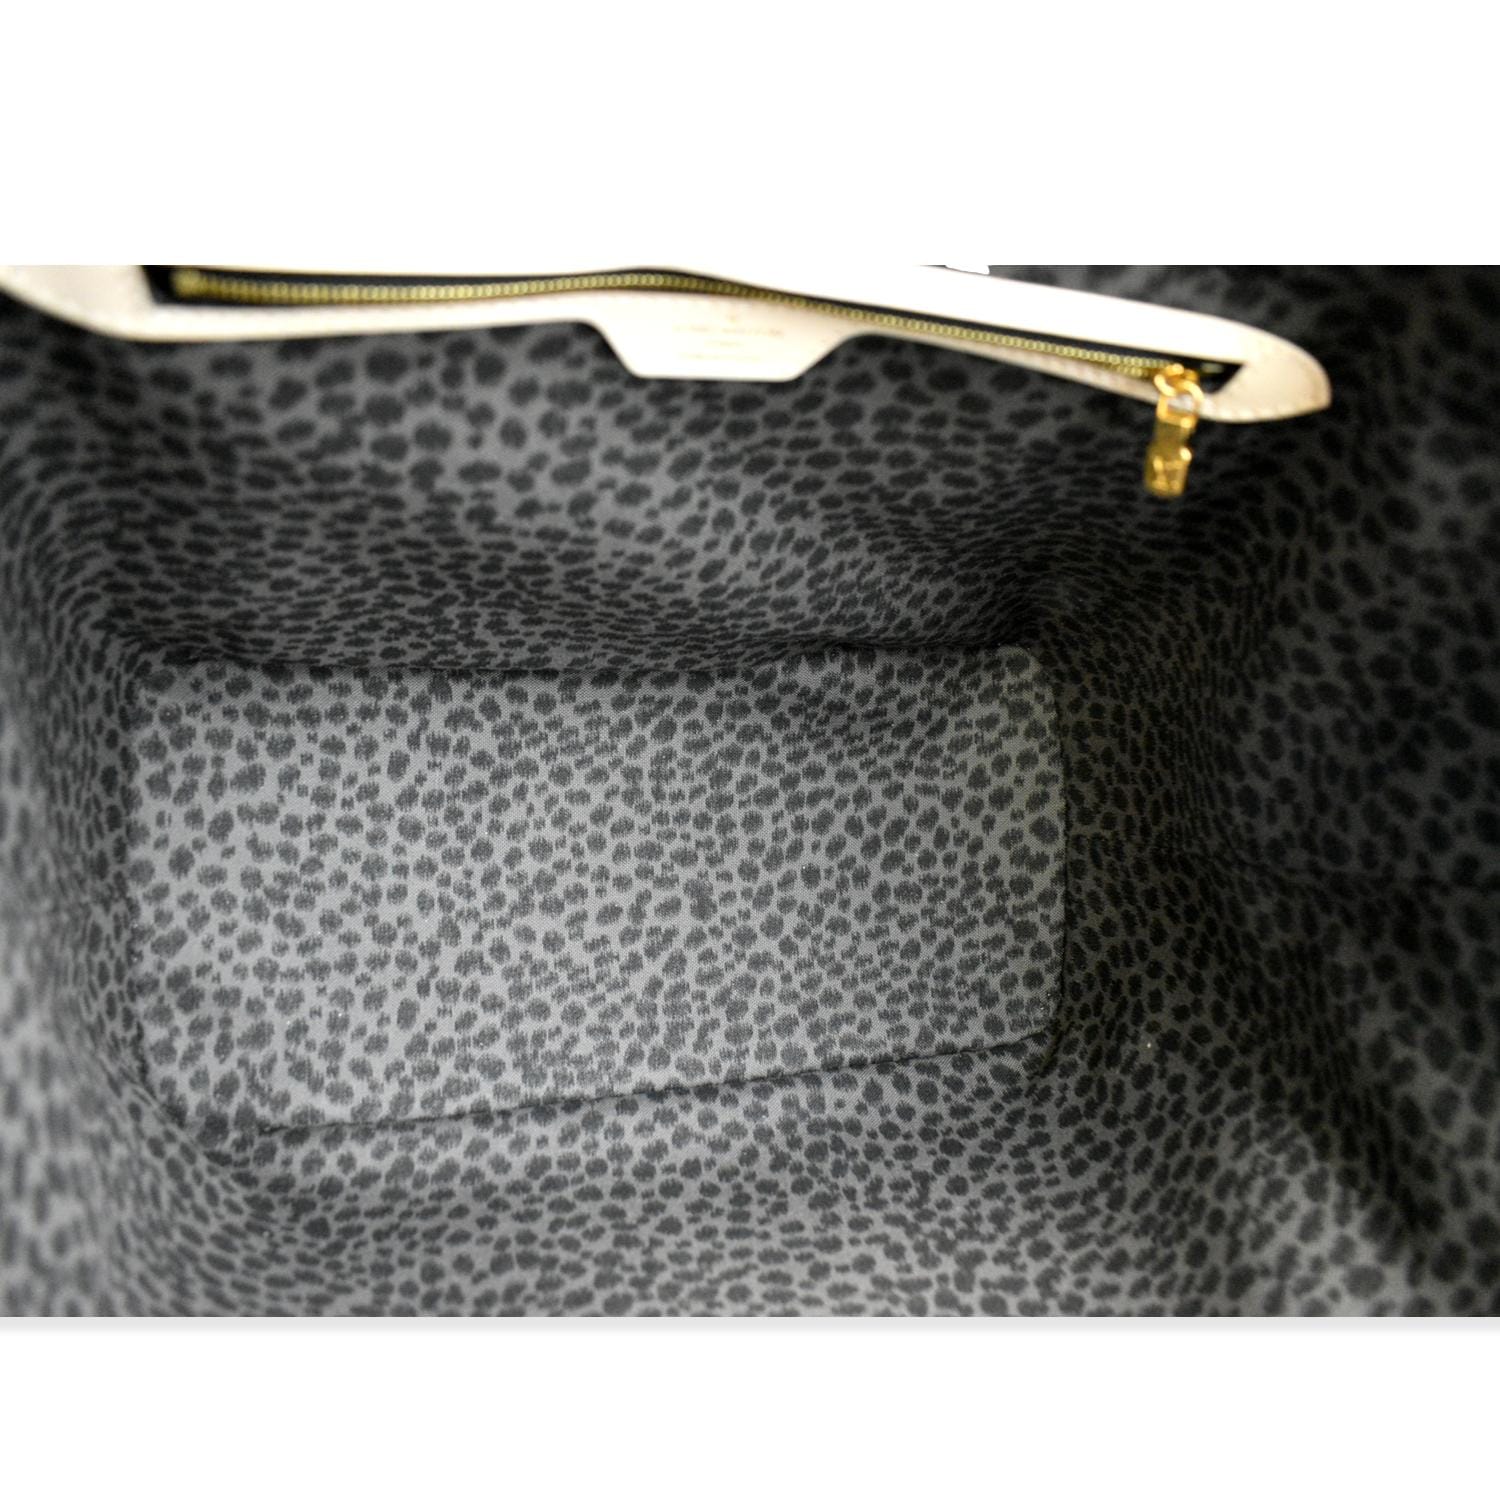 🍀LOUIS VUITTON Wild At Heart Neverfull MM Creme Black Tote